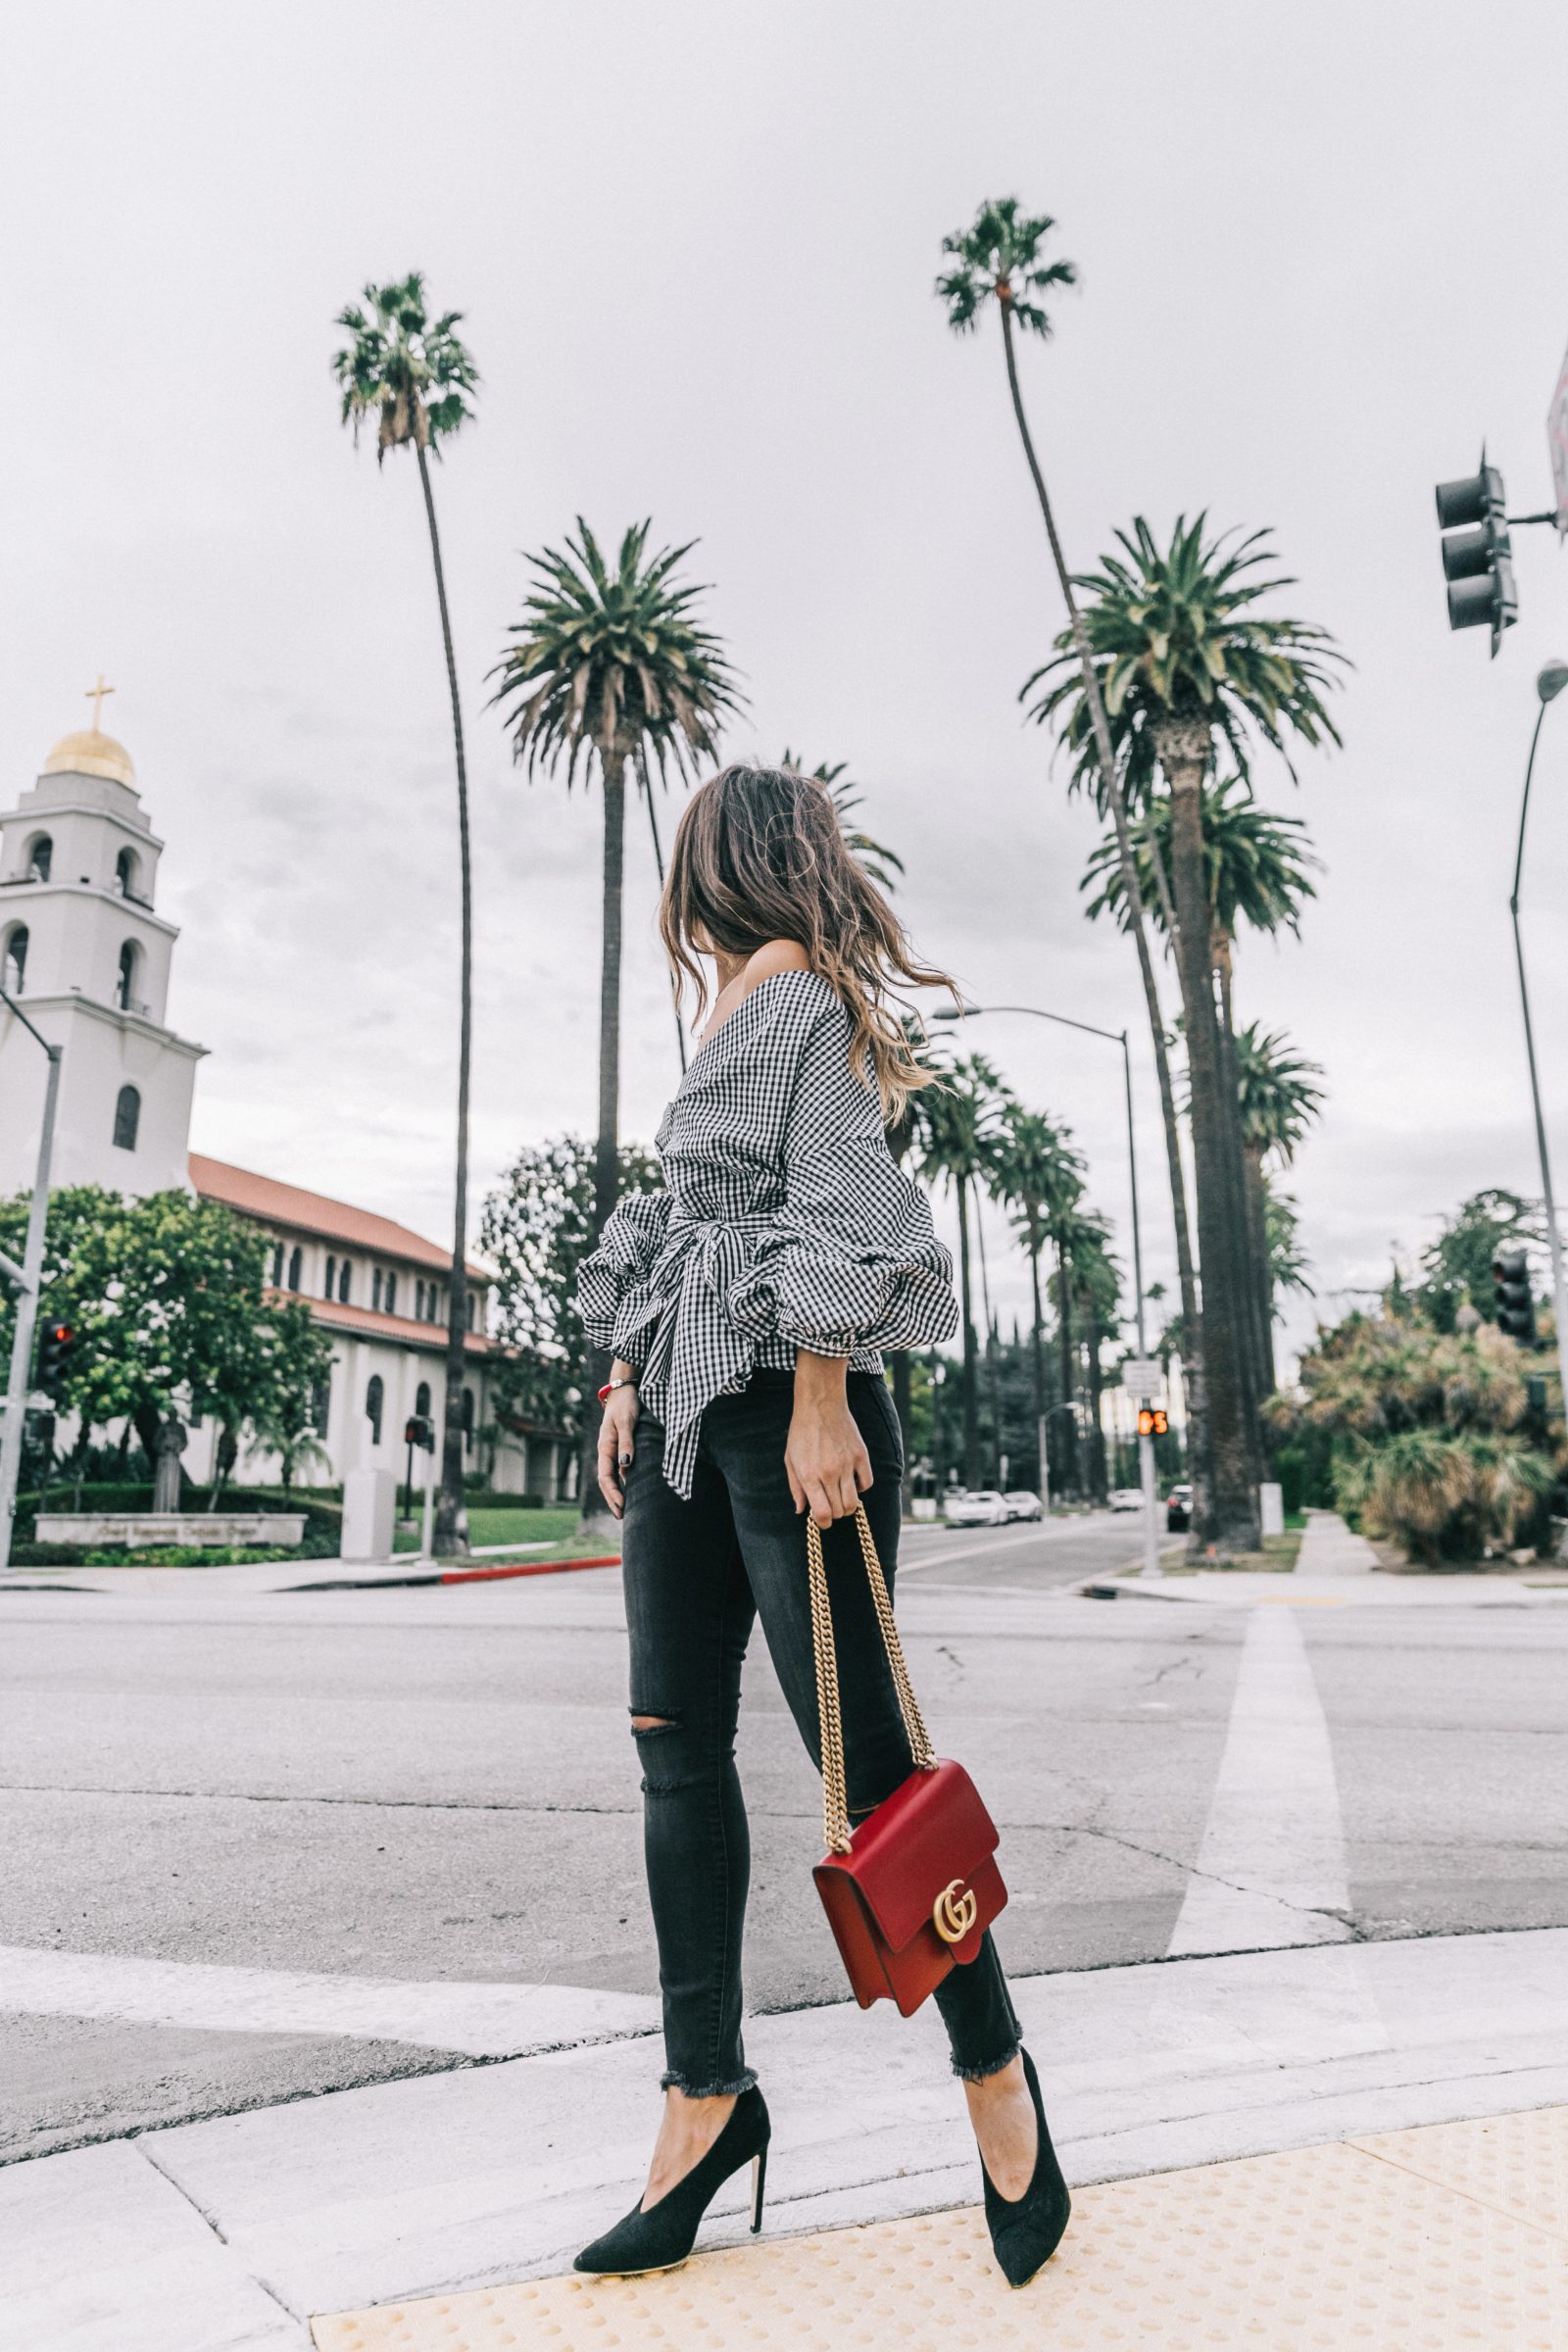 beverly_hills-off_the_shoulders_shirt-plaid-skinny_jeans-ripped_jeans-sincerely_jules_shop-gucci_bag-chicwish-outfit-street_style-los_angeles-collage_vintage-41